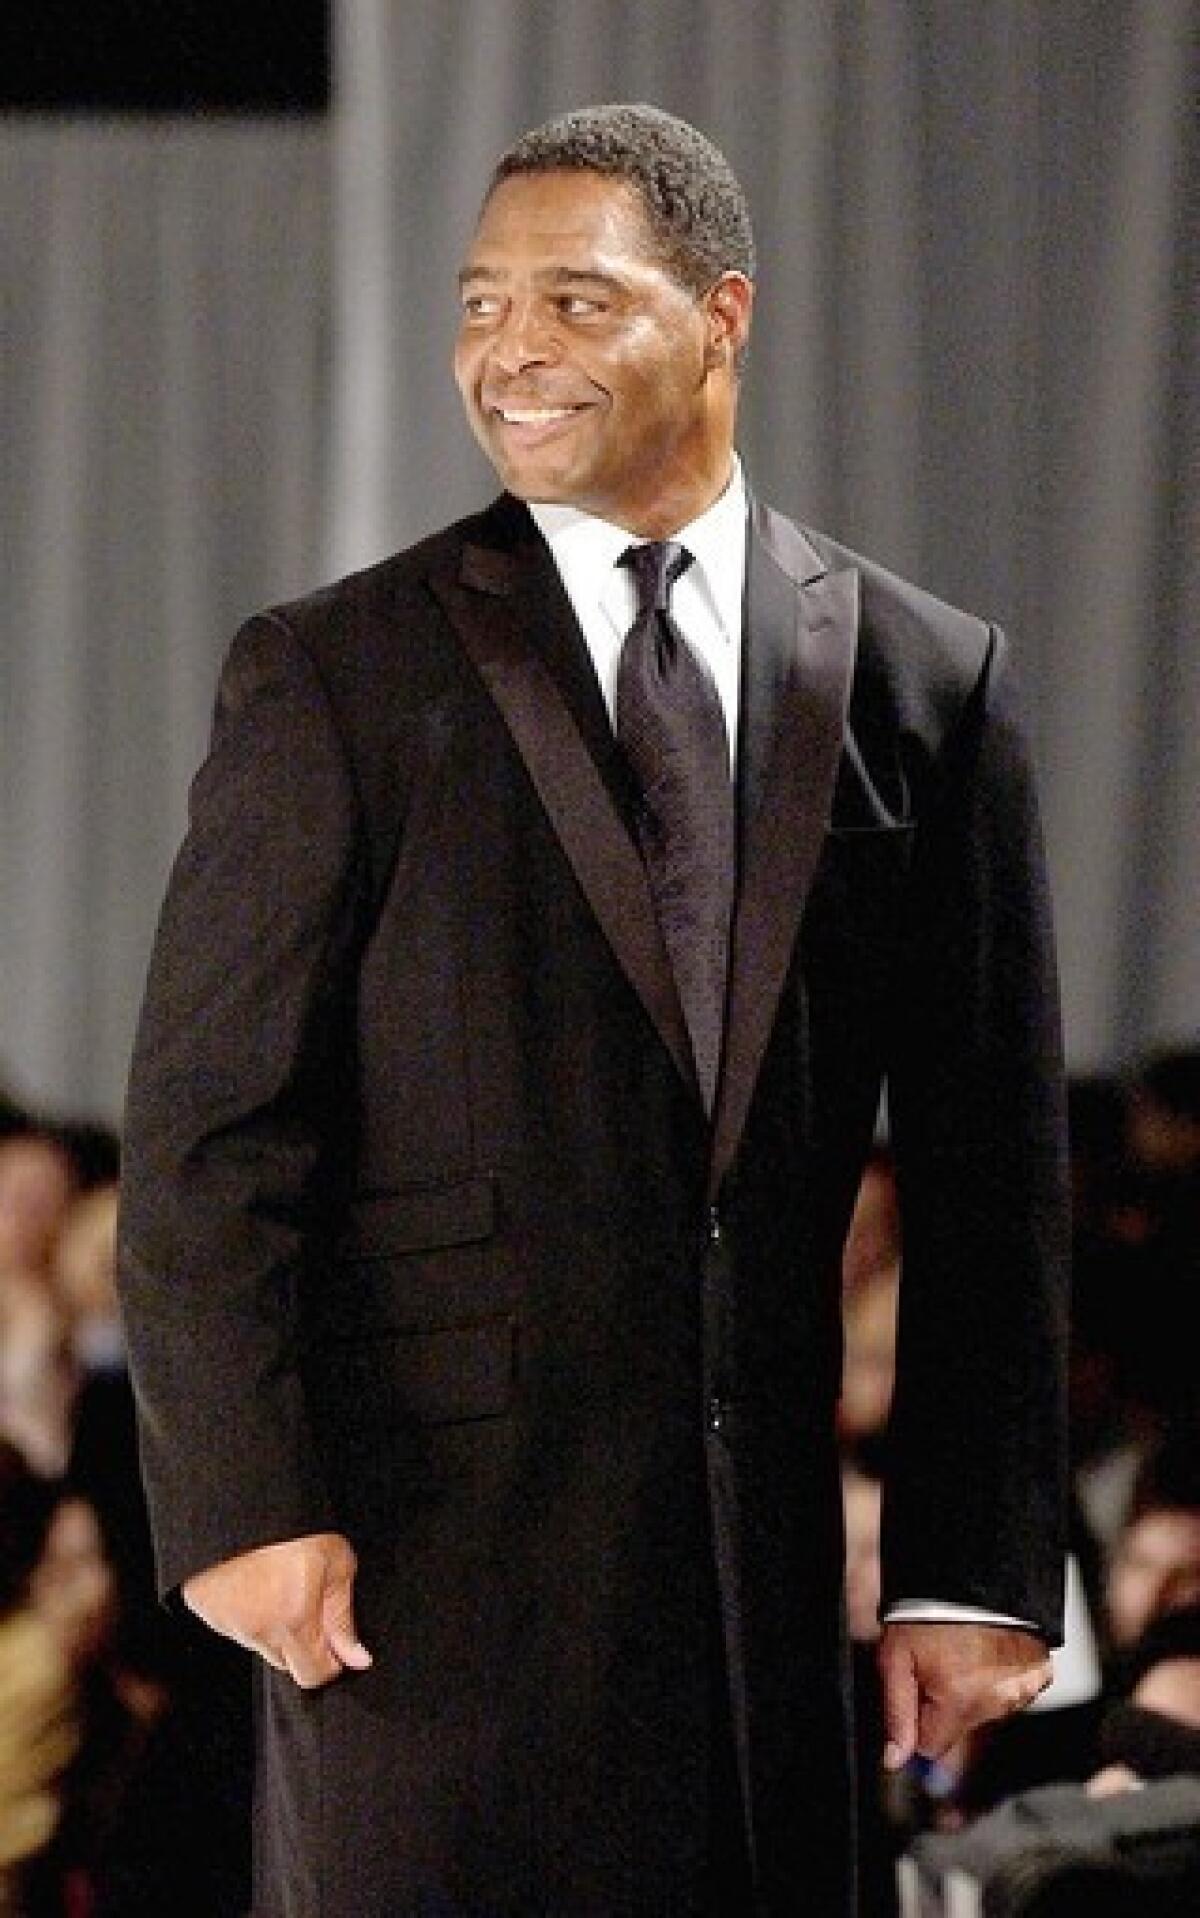 Marcus Allen is seen during 4th annual "ten" Fashion Show presented by General Motors in Los Angeles in 2005.